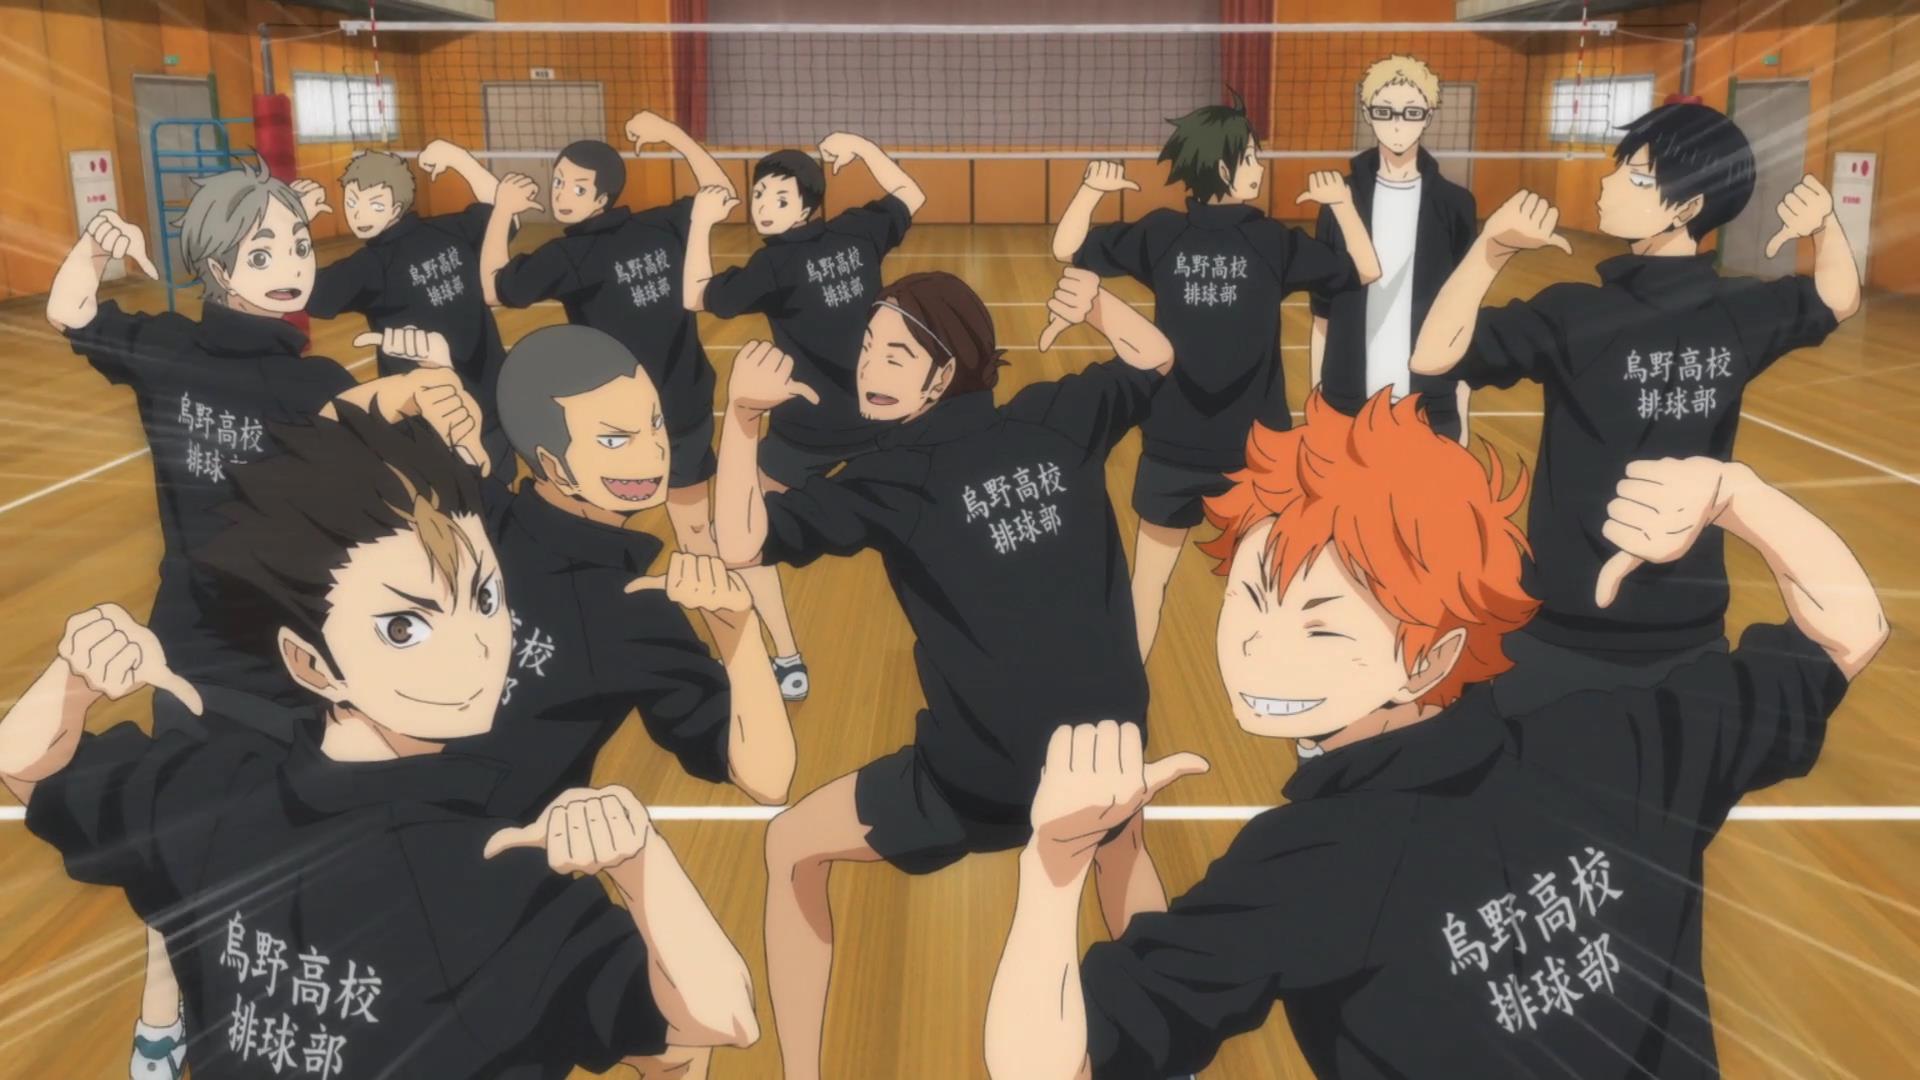 Fave Anime Haikyuu!! Movies Exits Netflix in July 2022